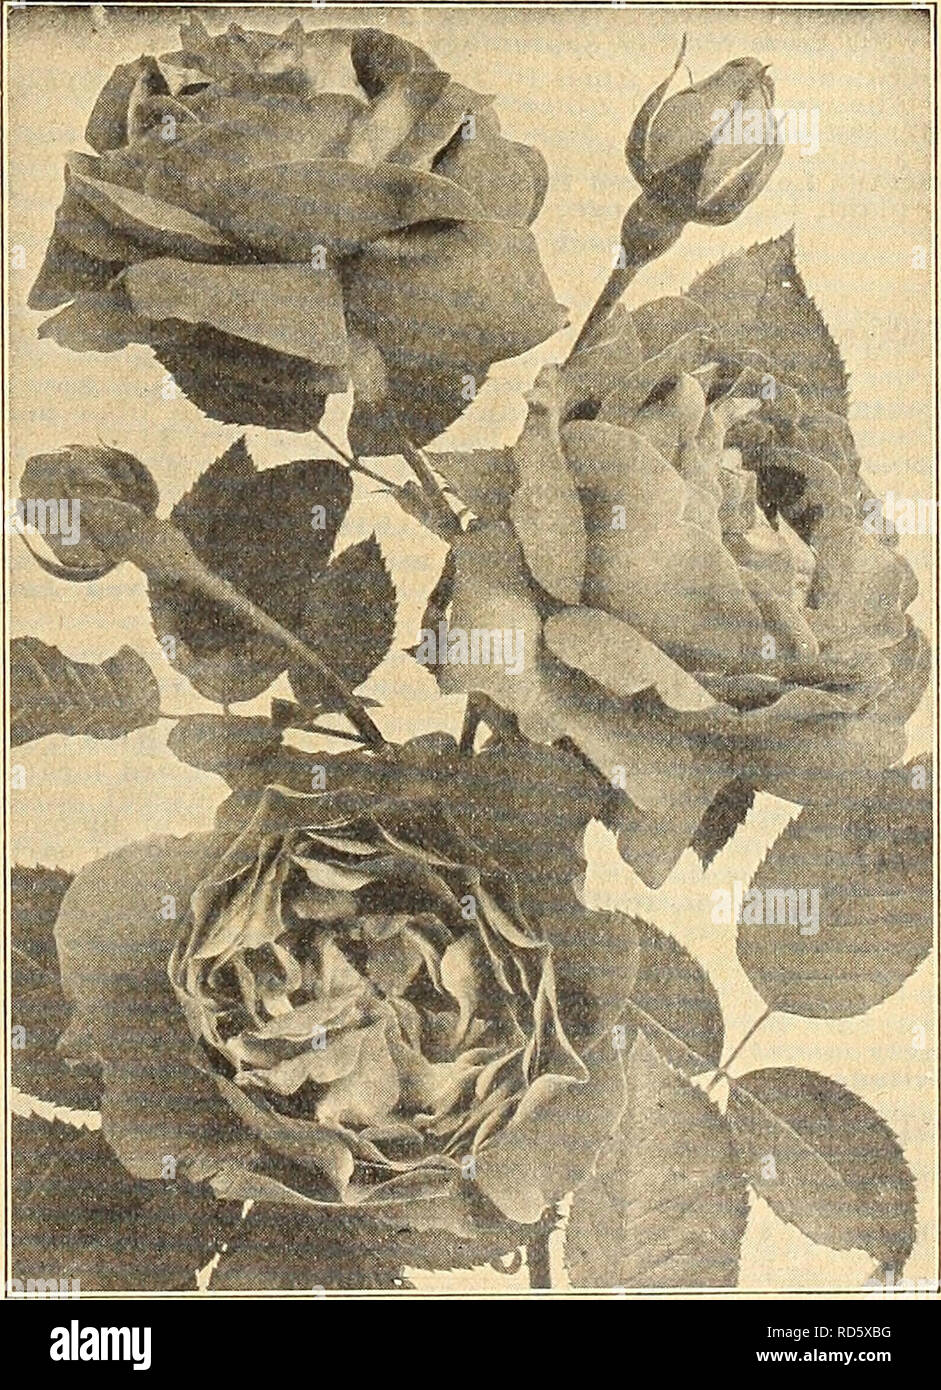 . Currie's farm &amp; garden annual : spring 1922 47th year. Flowers Seeds Catalogs; Bulbs (Plants) Seeds Catalogs; Vegetables Seeds Catalogs; Nurseries (Horticulture) Catalogs; Plants, Ornamental Catalogs; Gardening Equipment and supplies Catalogs. ROSES Dwarf Fruiting Orange. Dwarf OrangeâA true Orange, bearing masses of waxy-white fragrant blos- soms followed by bright colored, very sweet fruit. Plants bloom and bear fruit when only five and six inches high. Nice plants, 30c each; large plants, 50c and $1.00. Fuchsia, Gloire des JIarches. THE BEST FUCHSIAS. PhenomenalâBright scarlet flowers Stock Photo